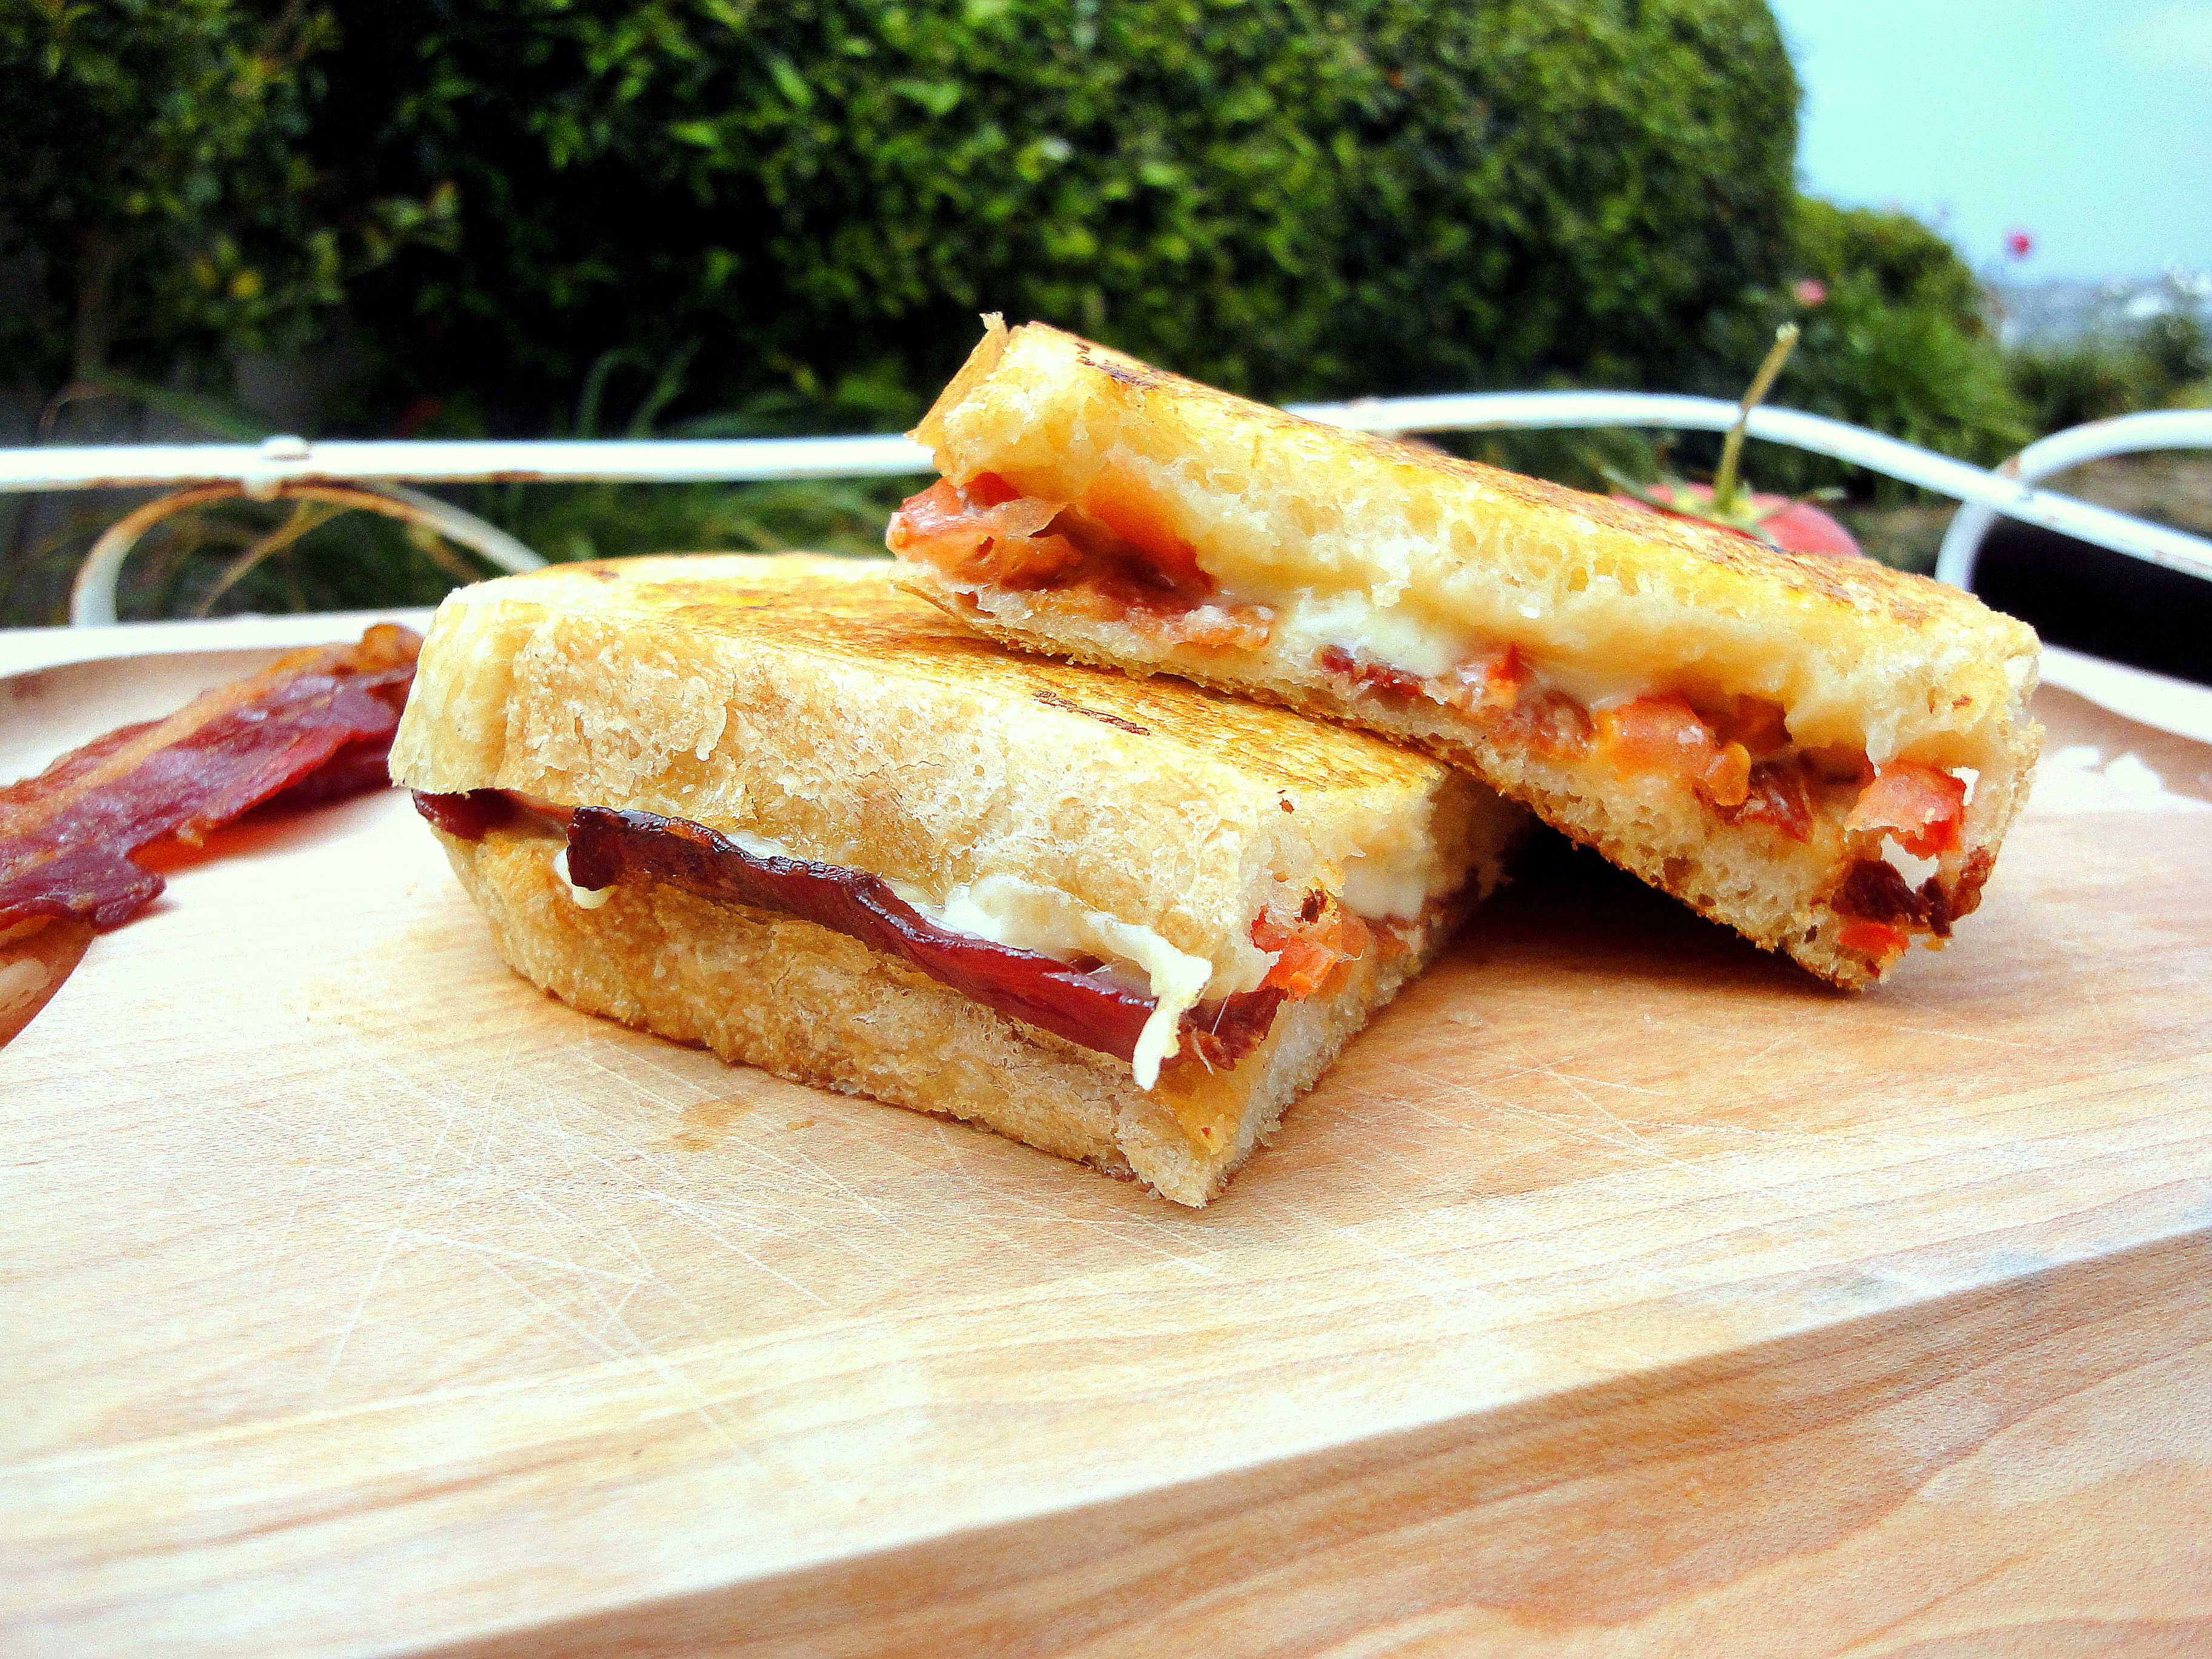 This Bacon, Tomato & Roasted Garlic Grilled Cheese is most delicious grilled cheese I've ever had! The roasted garlic takes it over the edge.